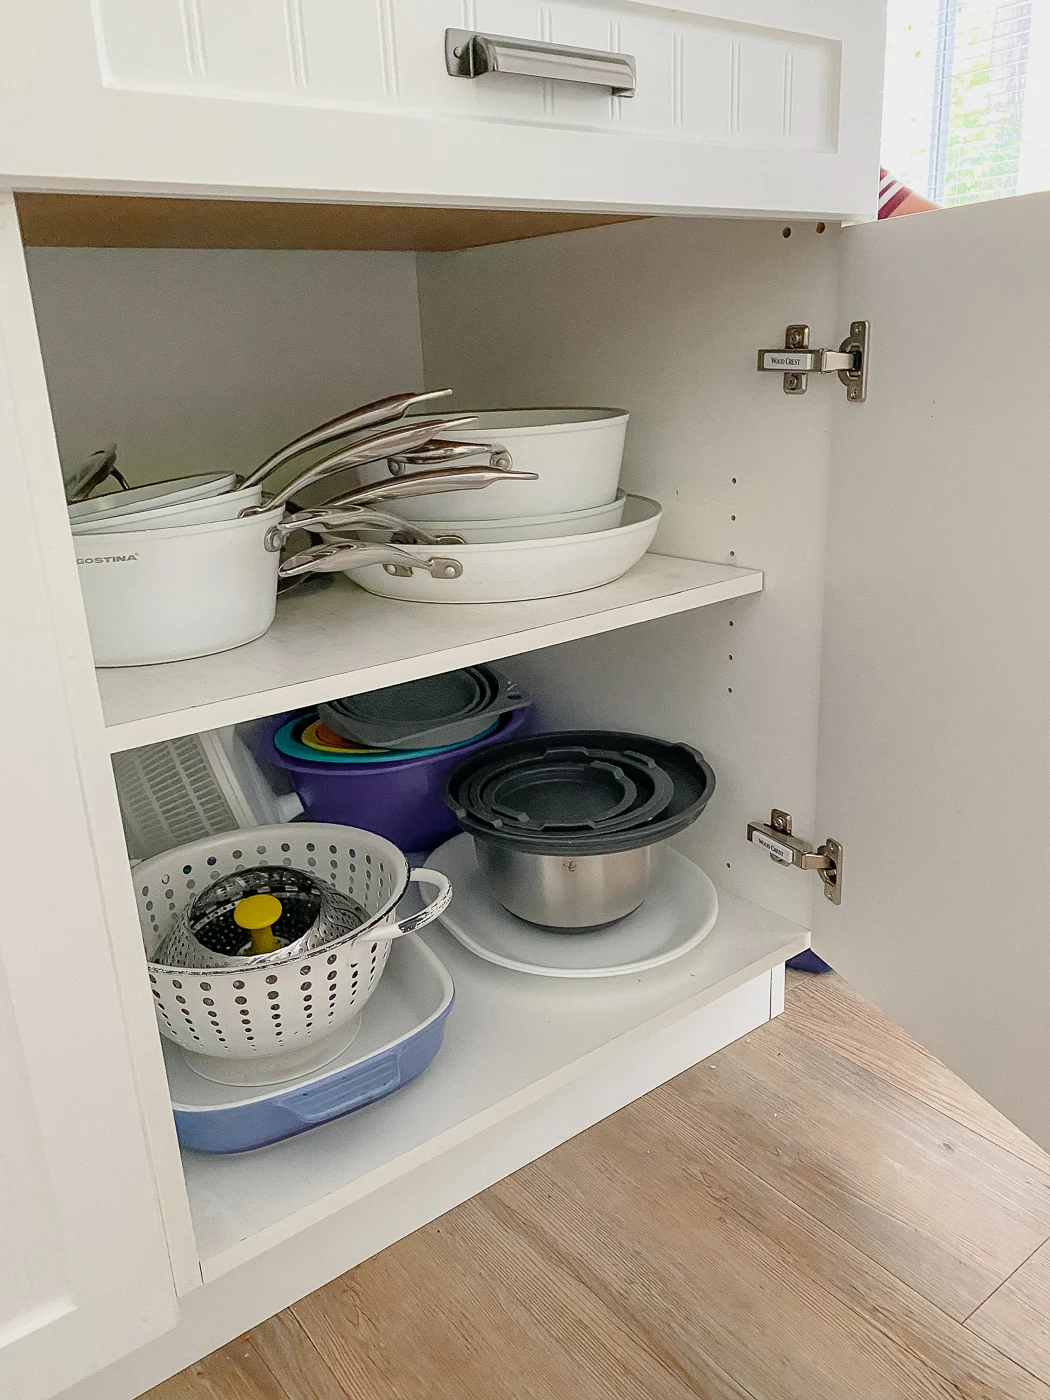 15 Creative Ideas To Organize Dish And Plate Storage On Your